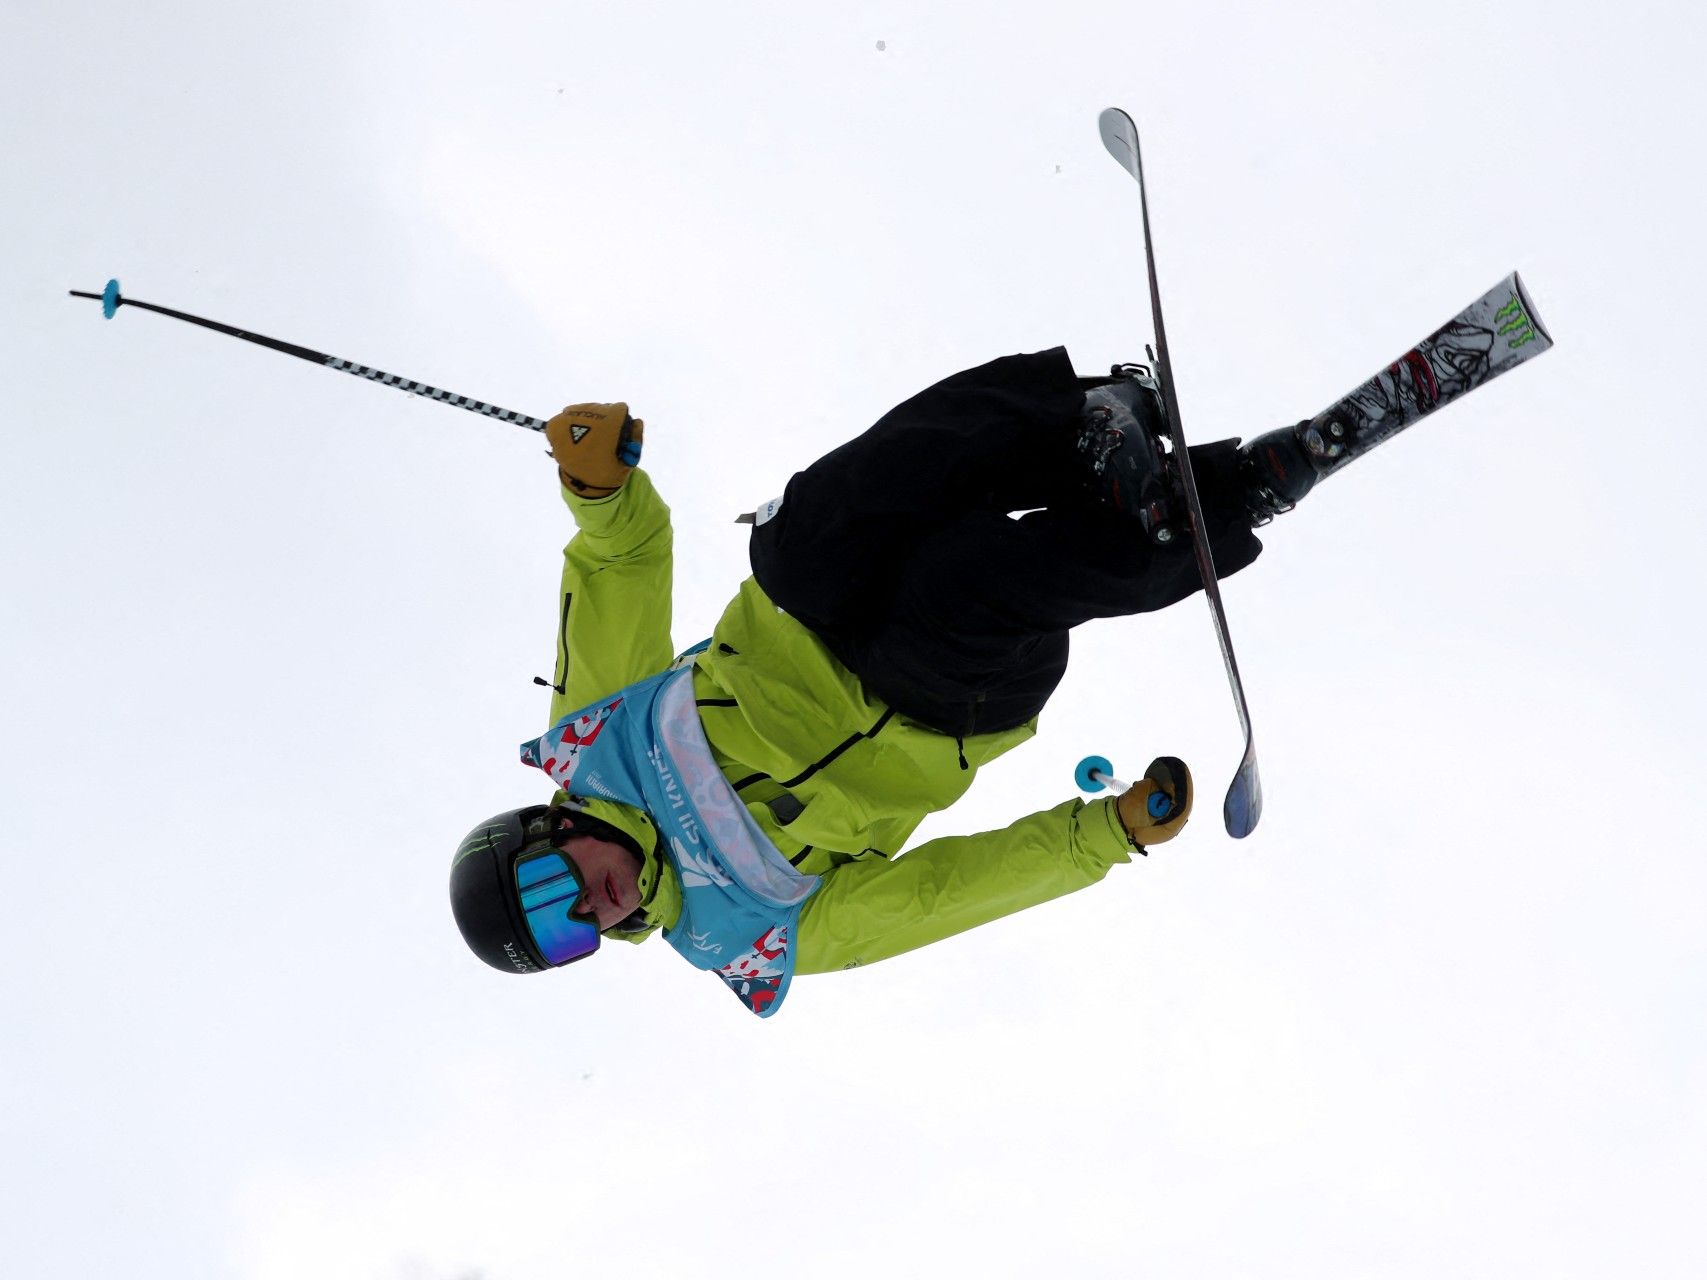 Ferreira Earns Bronze in Halfpipe at the World Championships